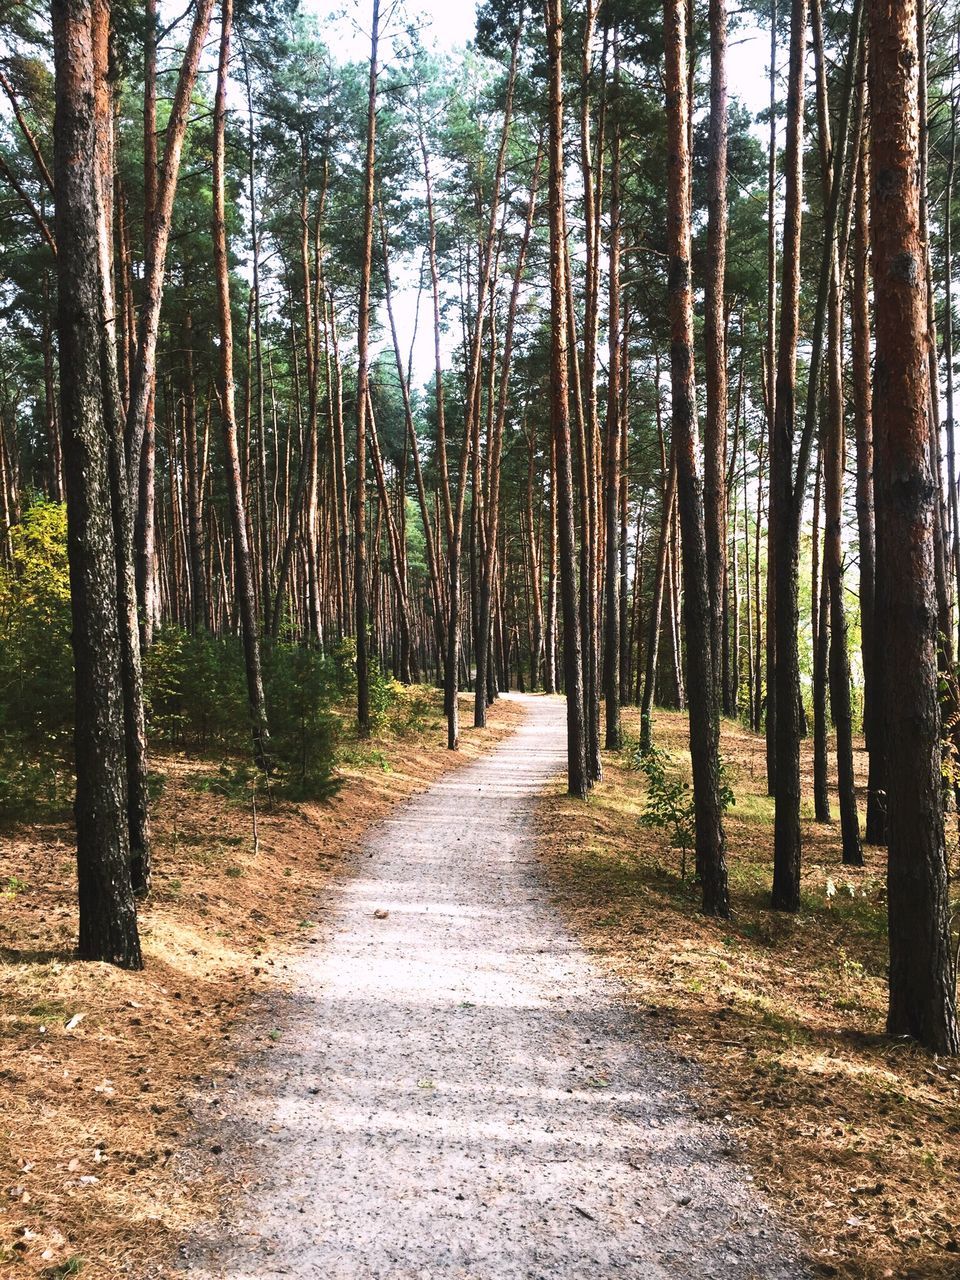 FOOTPATH IN FOREST